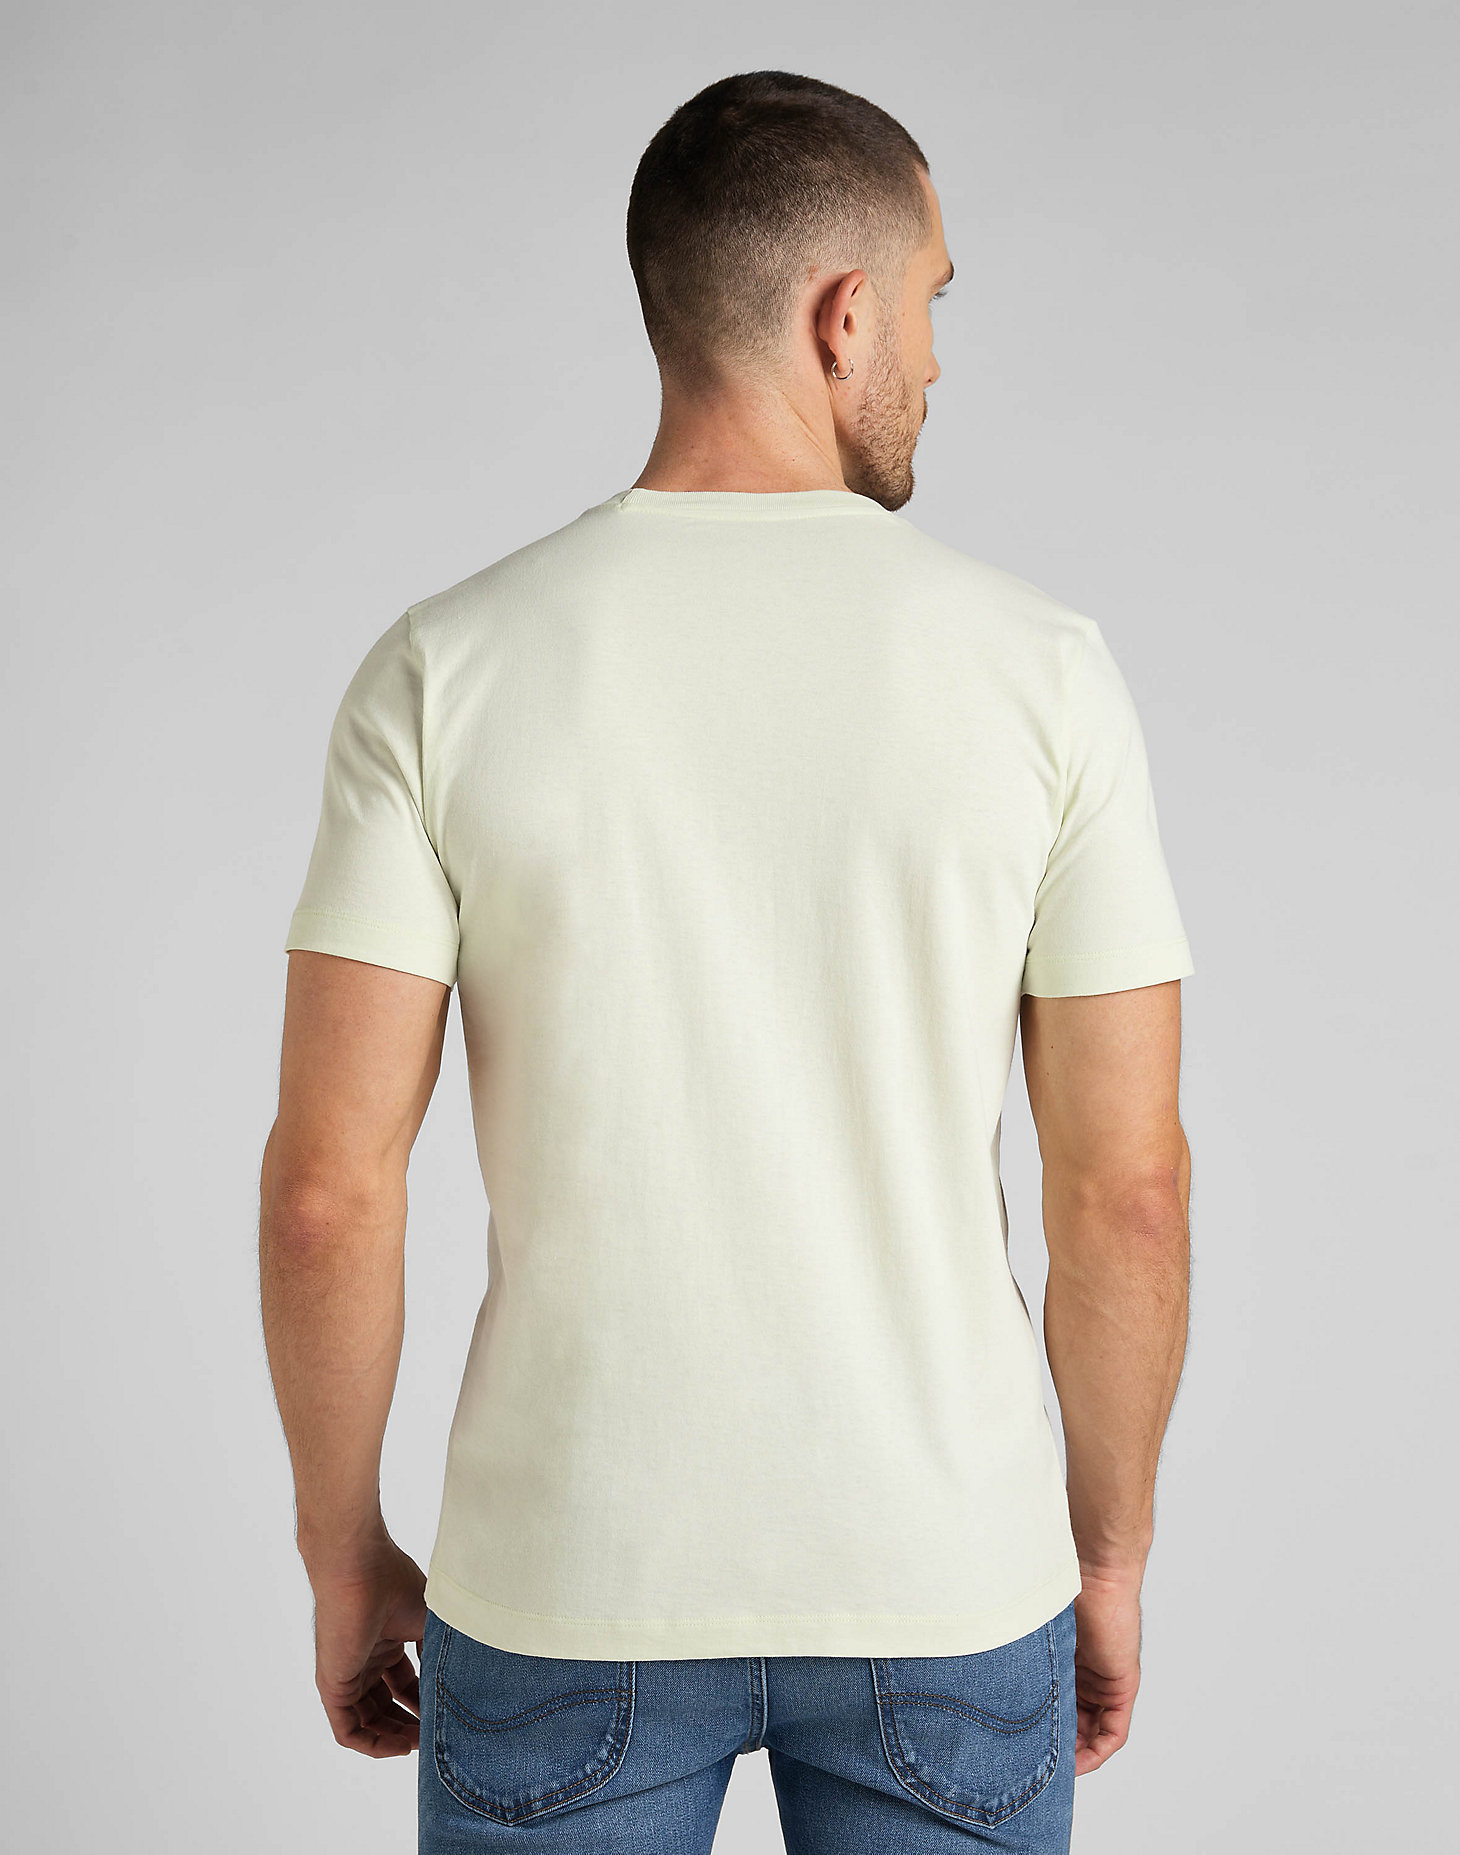 Short Sleeve Painter Tee in Canary Green alternative view 1